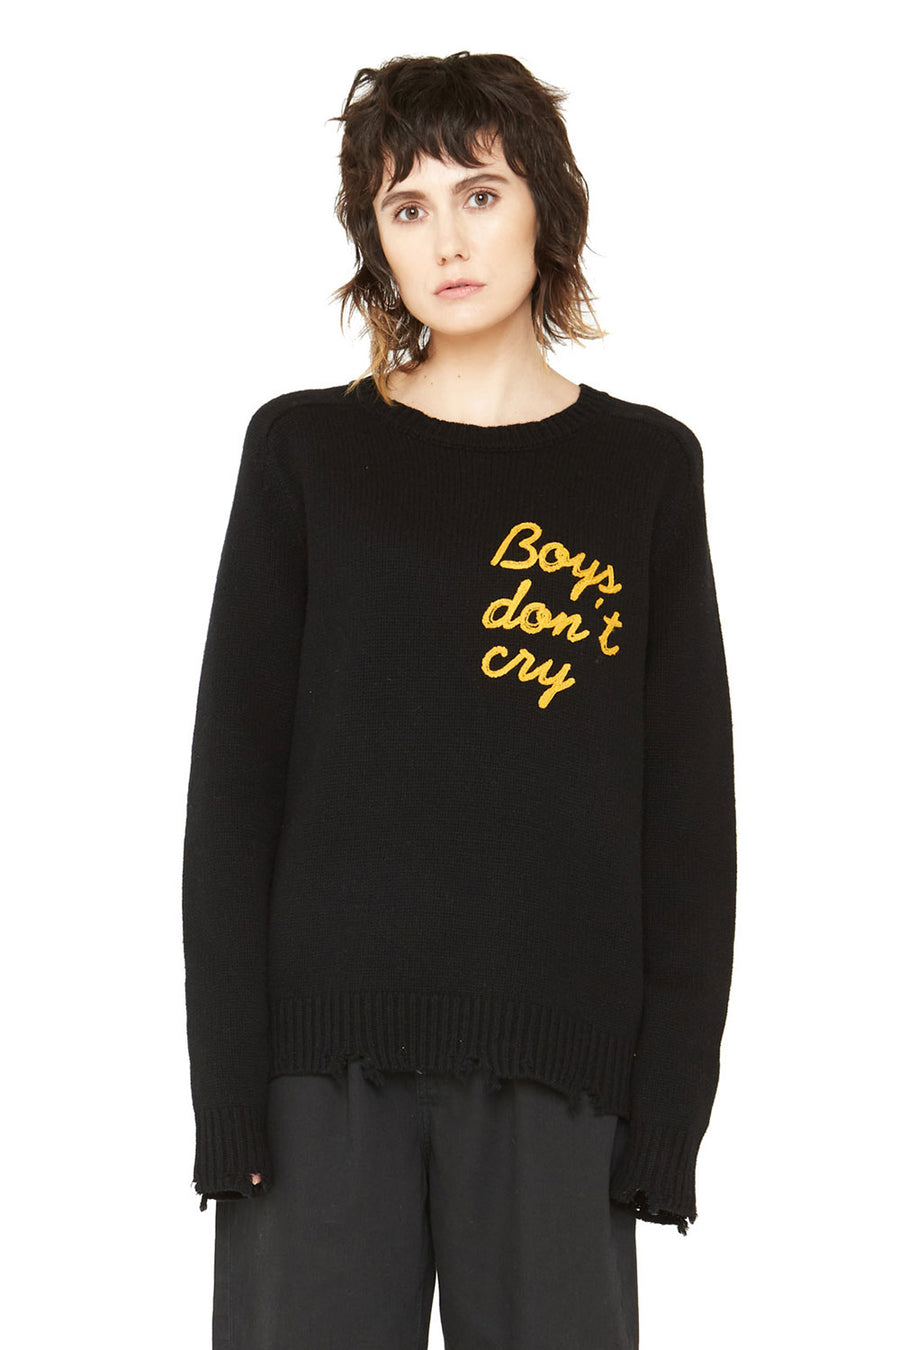 Boys Don’t Cry Cashmere Sweater - Black WOMENS chaserbrand